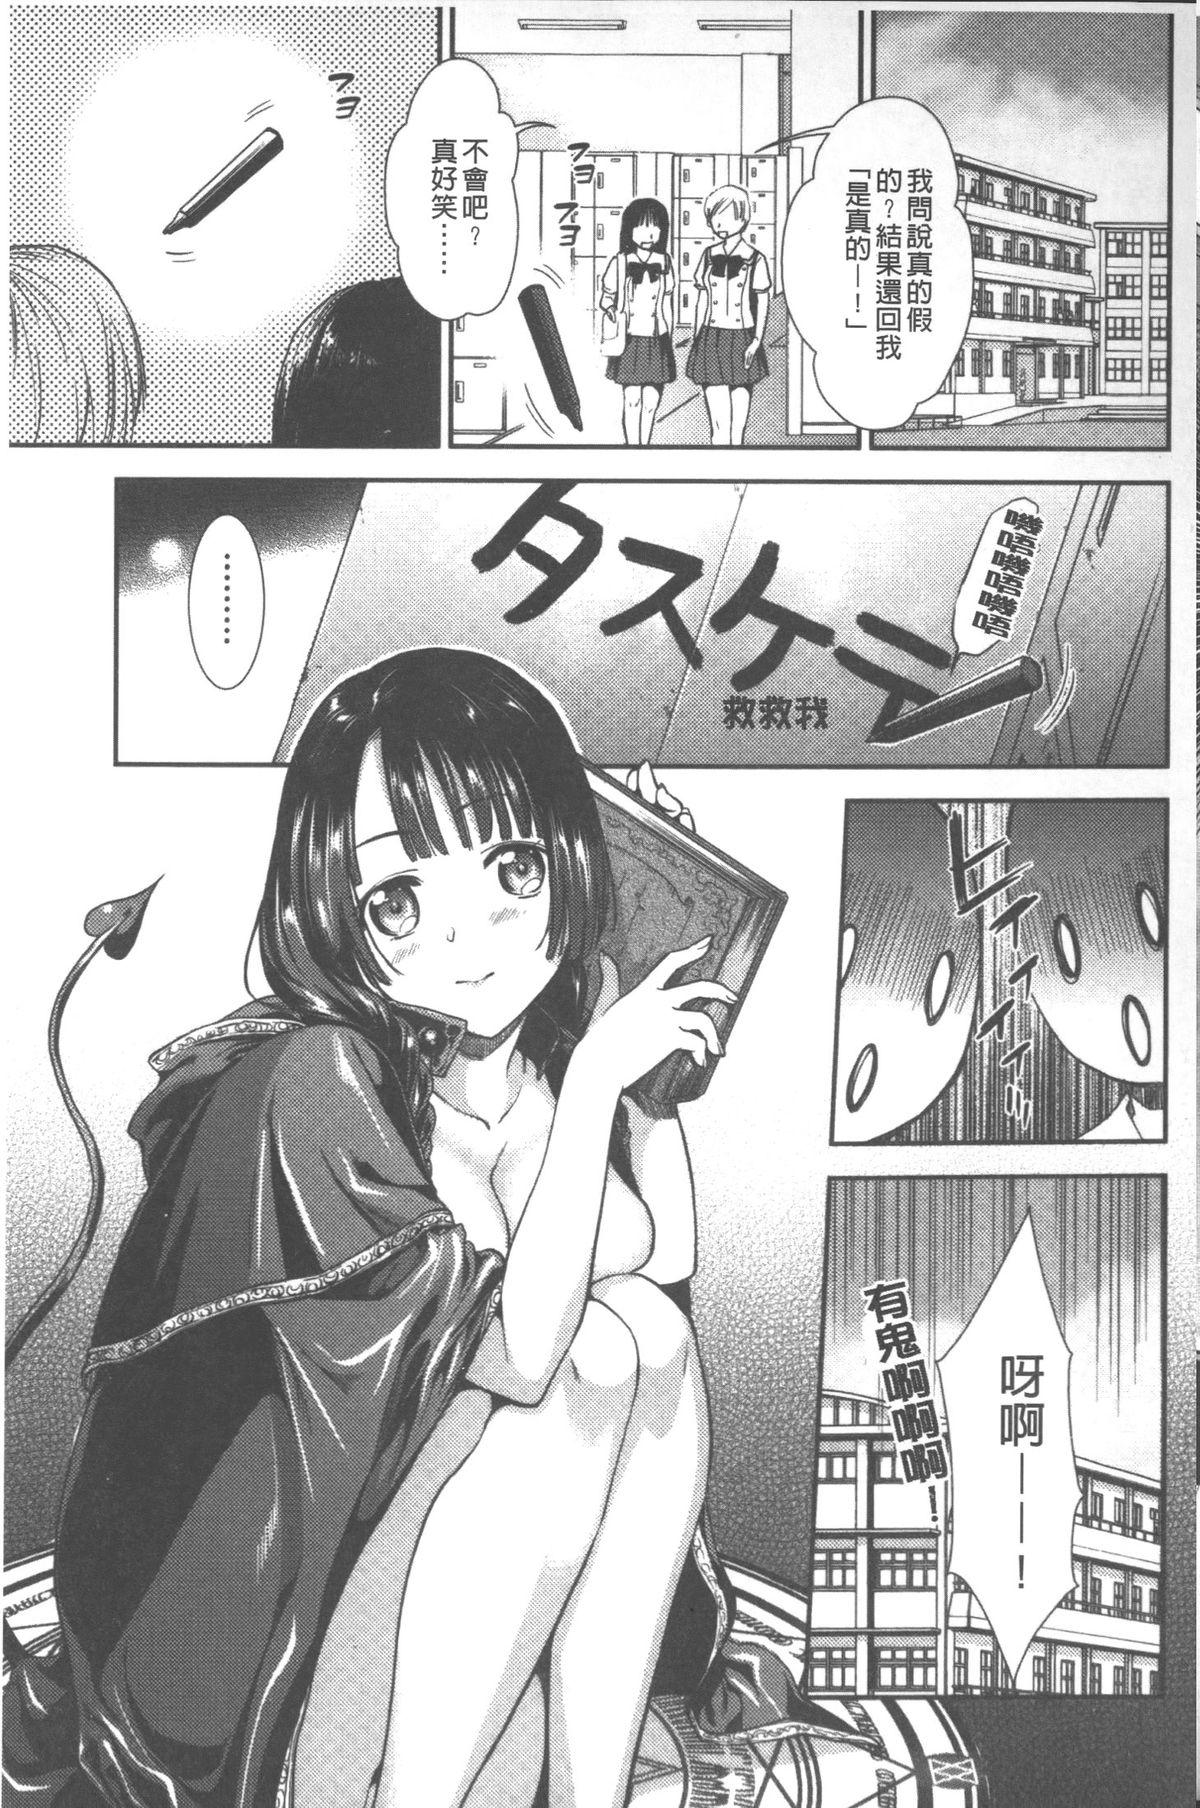 Striptease Hatsujou no Genri - The Principle of Sexual Excitement New - Page 6